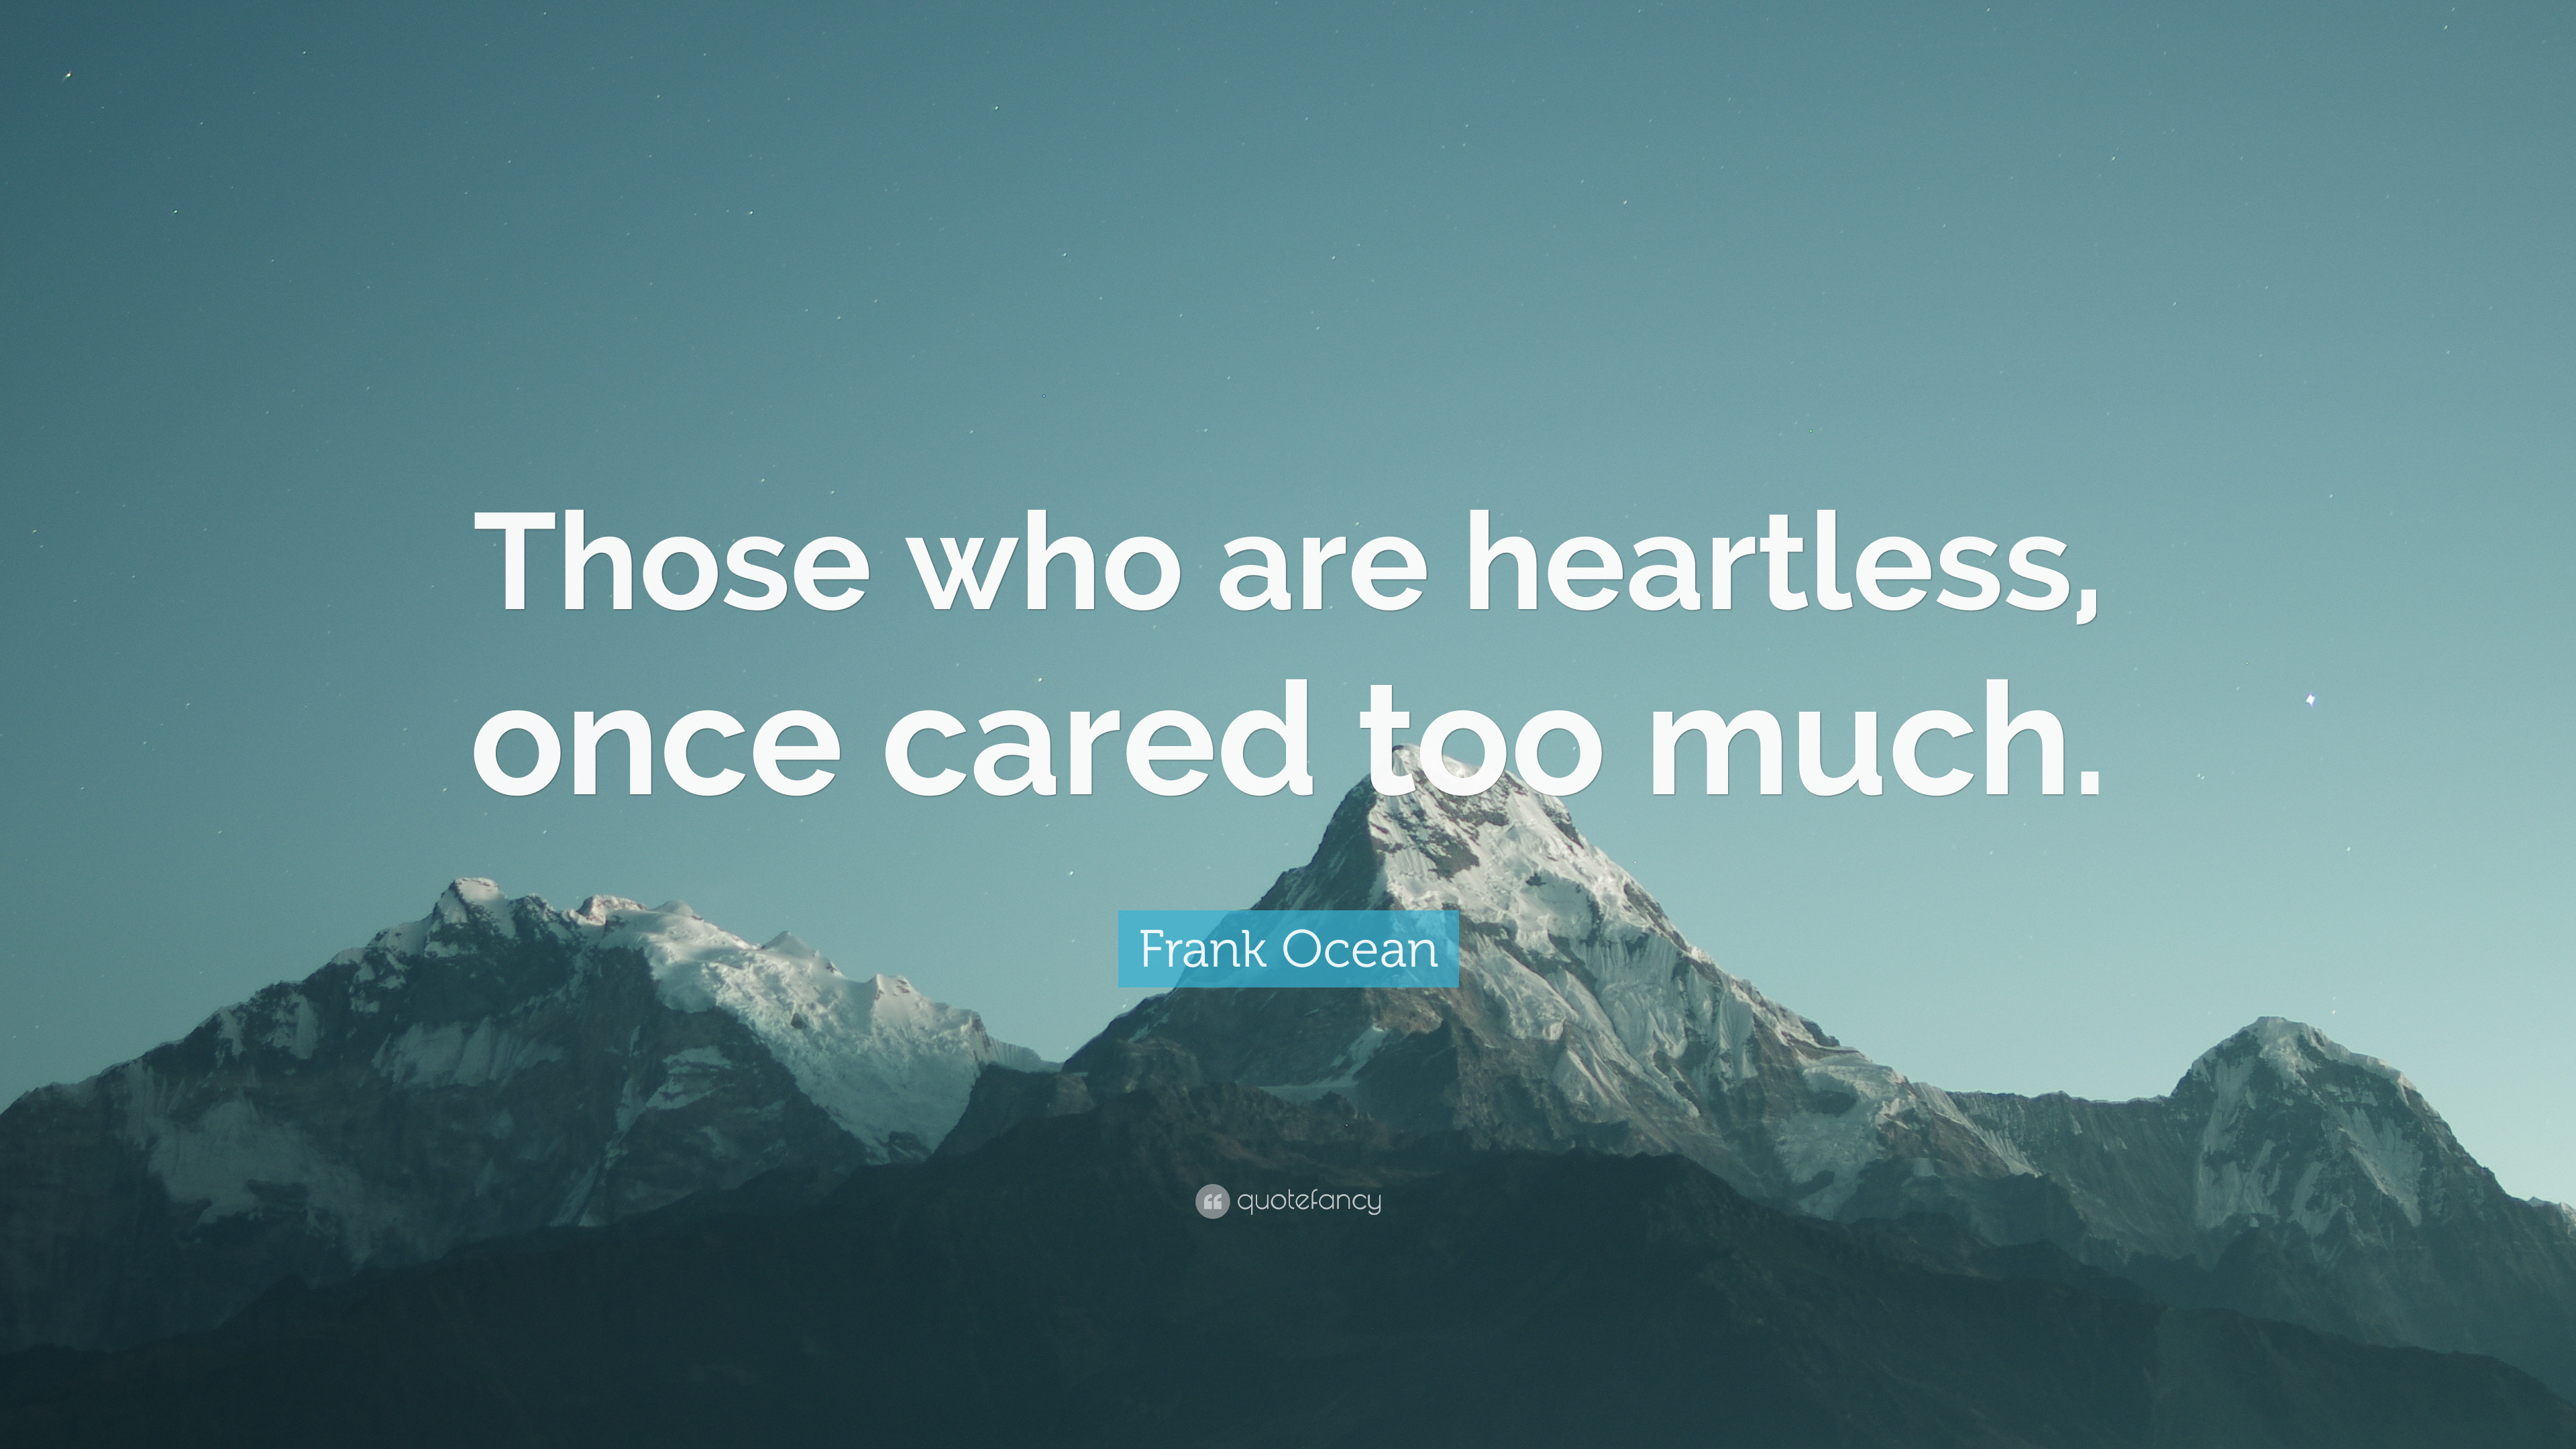 3840x2160 Frank Ocean Quote: “Those who are heartless, once cared too much.”